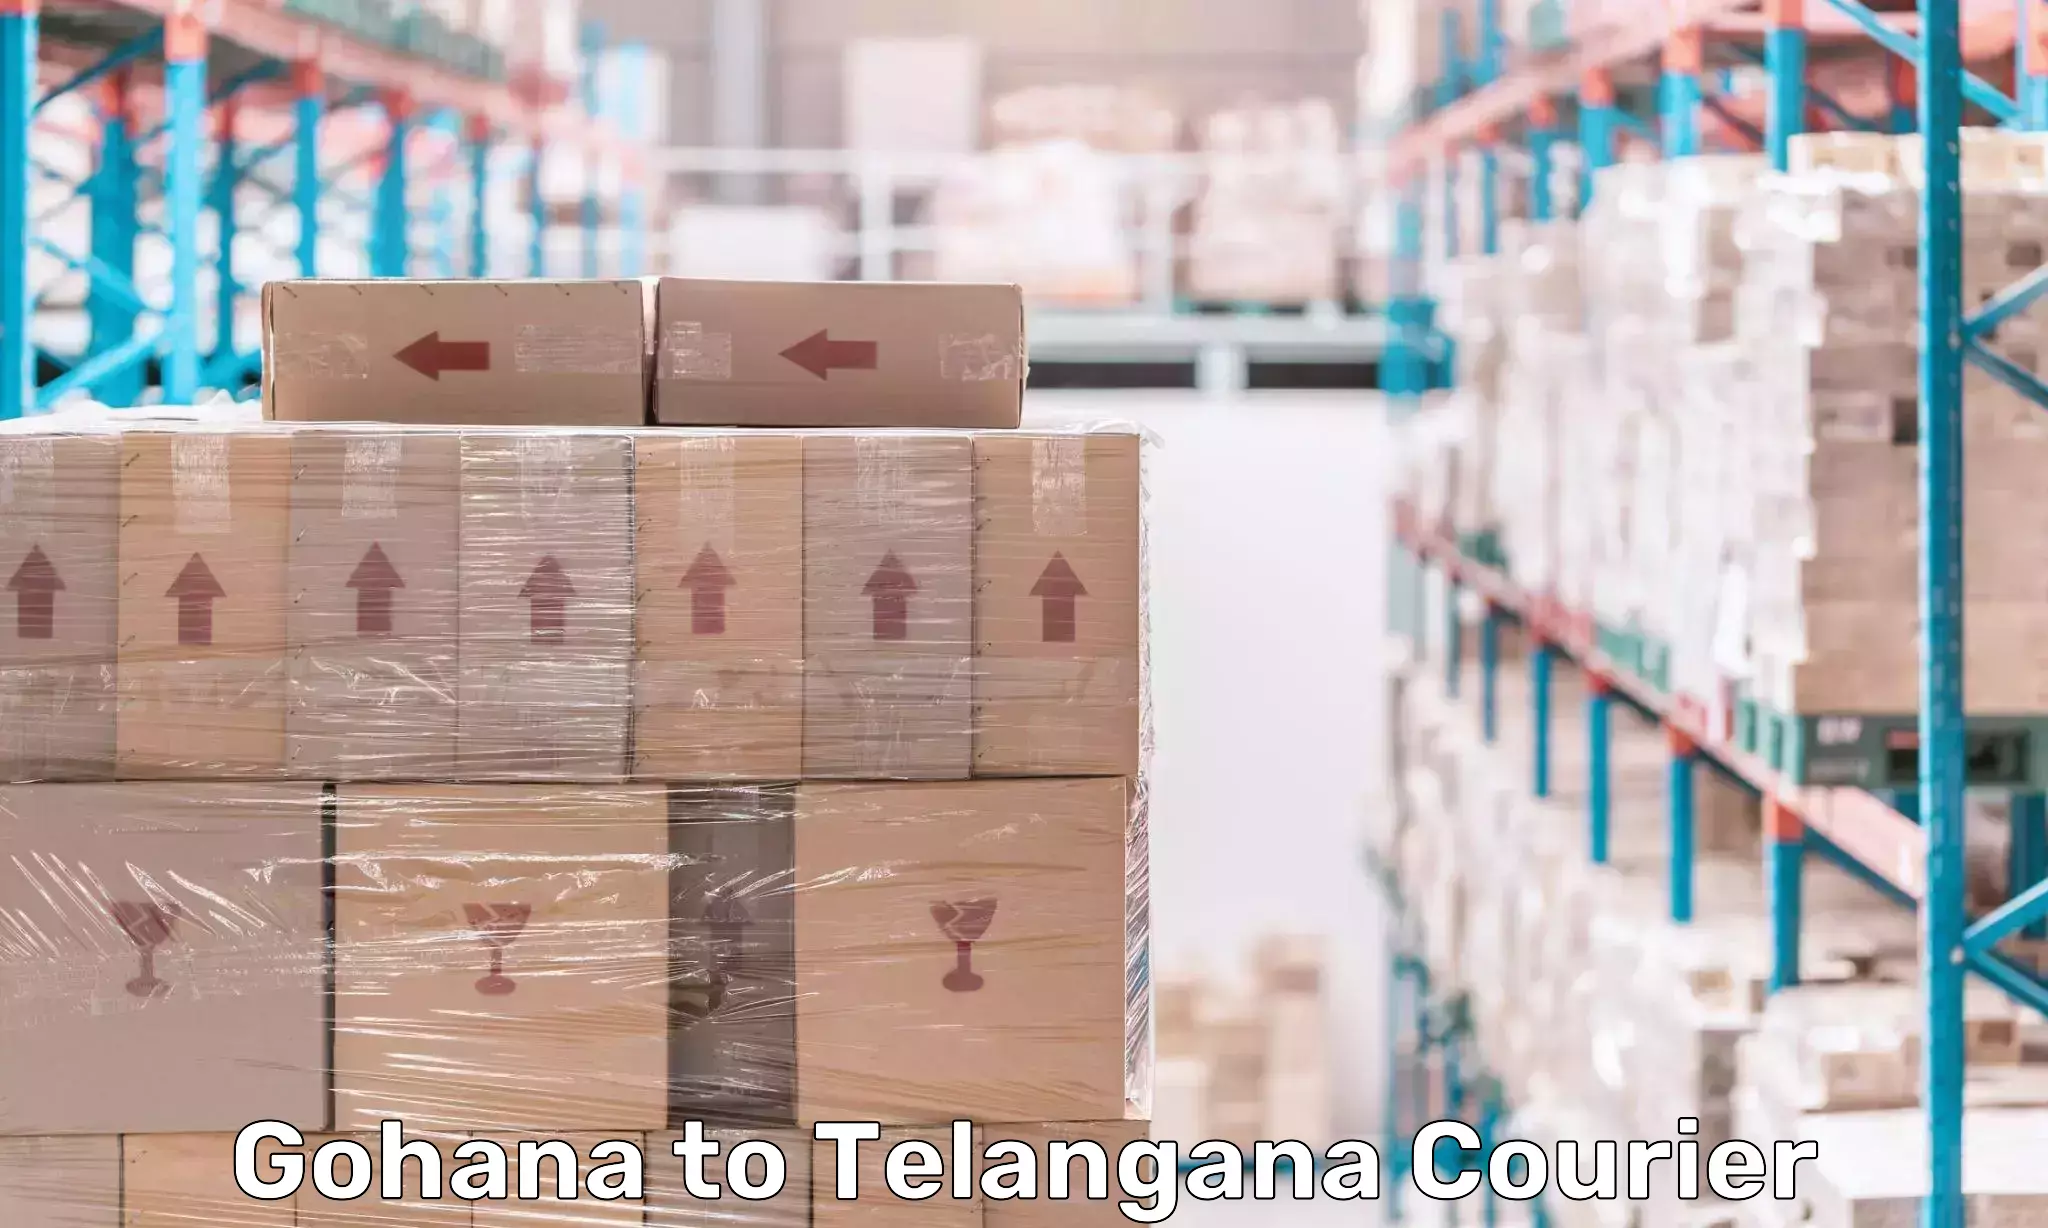 Multi-national courier services Gohana to Secunderabad